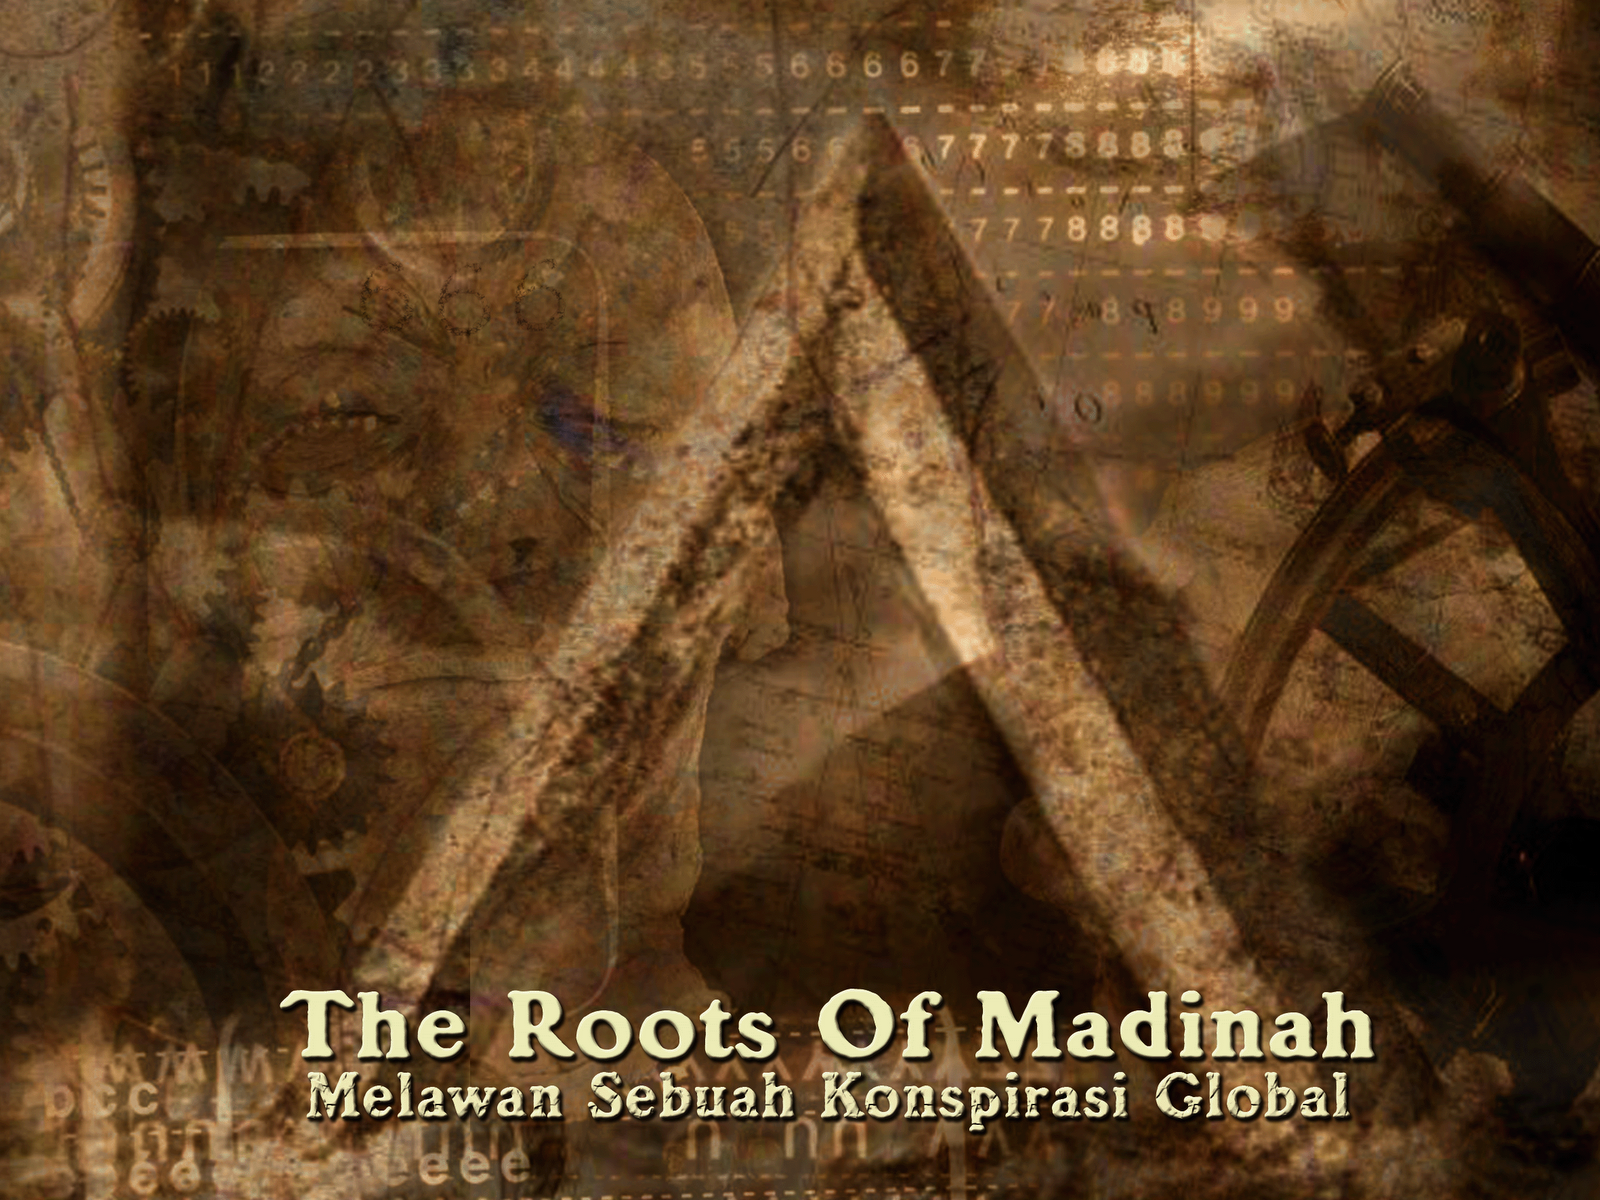 The Roots Of Madinah - Official Blog.